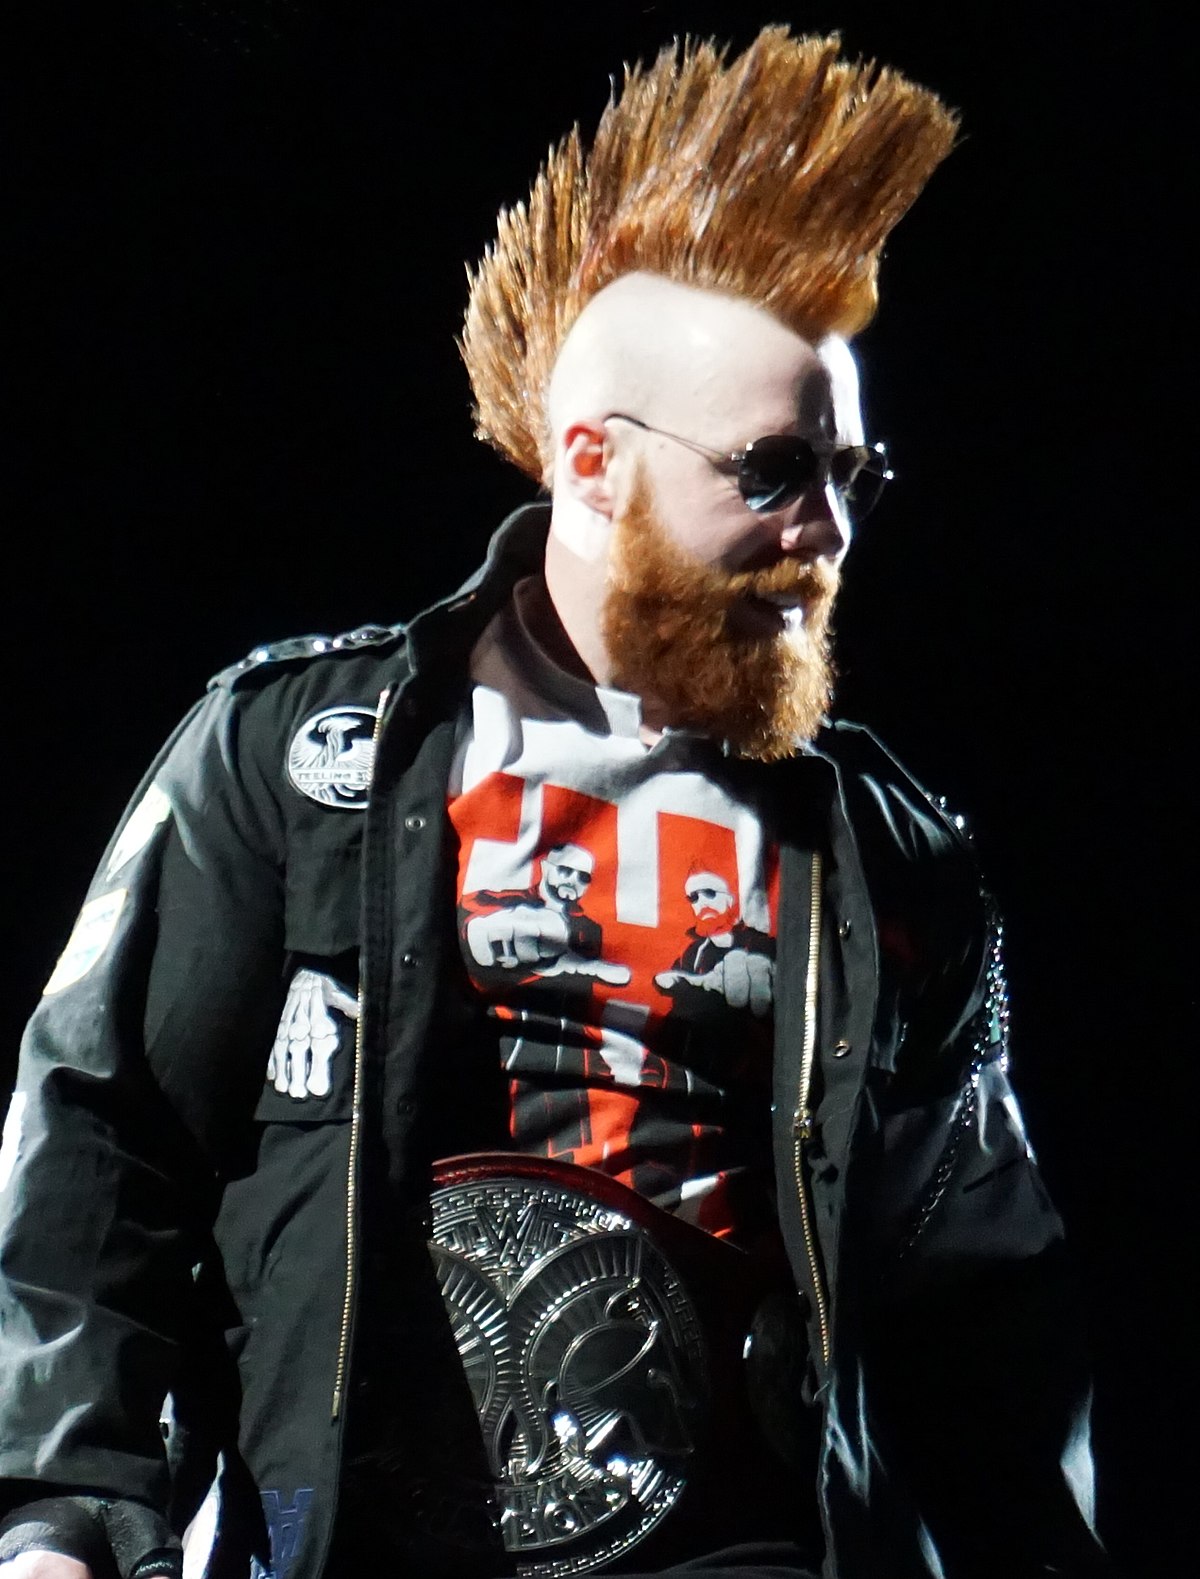 Stephen Farrelly is an Irish professional wrestler and actor. He is currently signed to WWE, where he performs on the SmackDown brand under the ring name Sheamus. Prior to joining WWE, he wrestled on the European independent circuit.